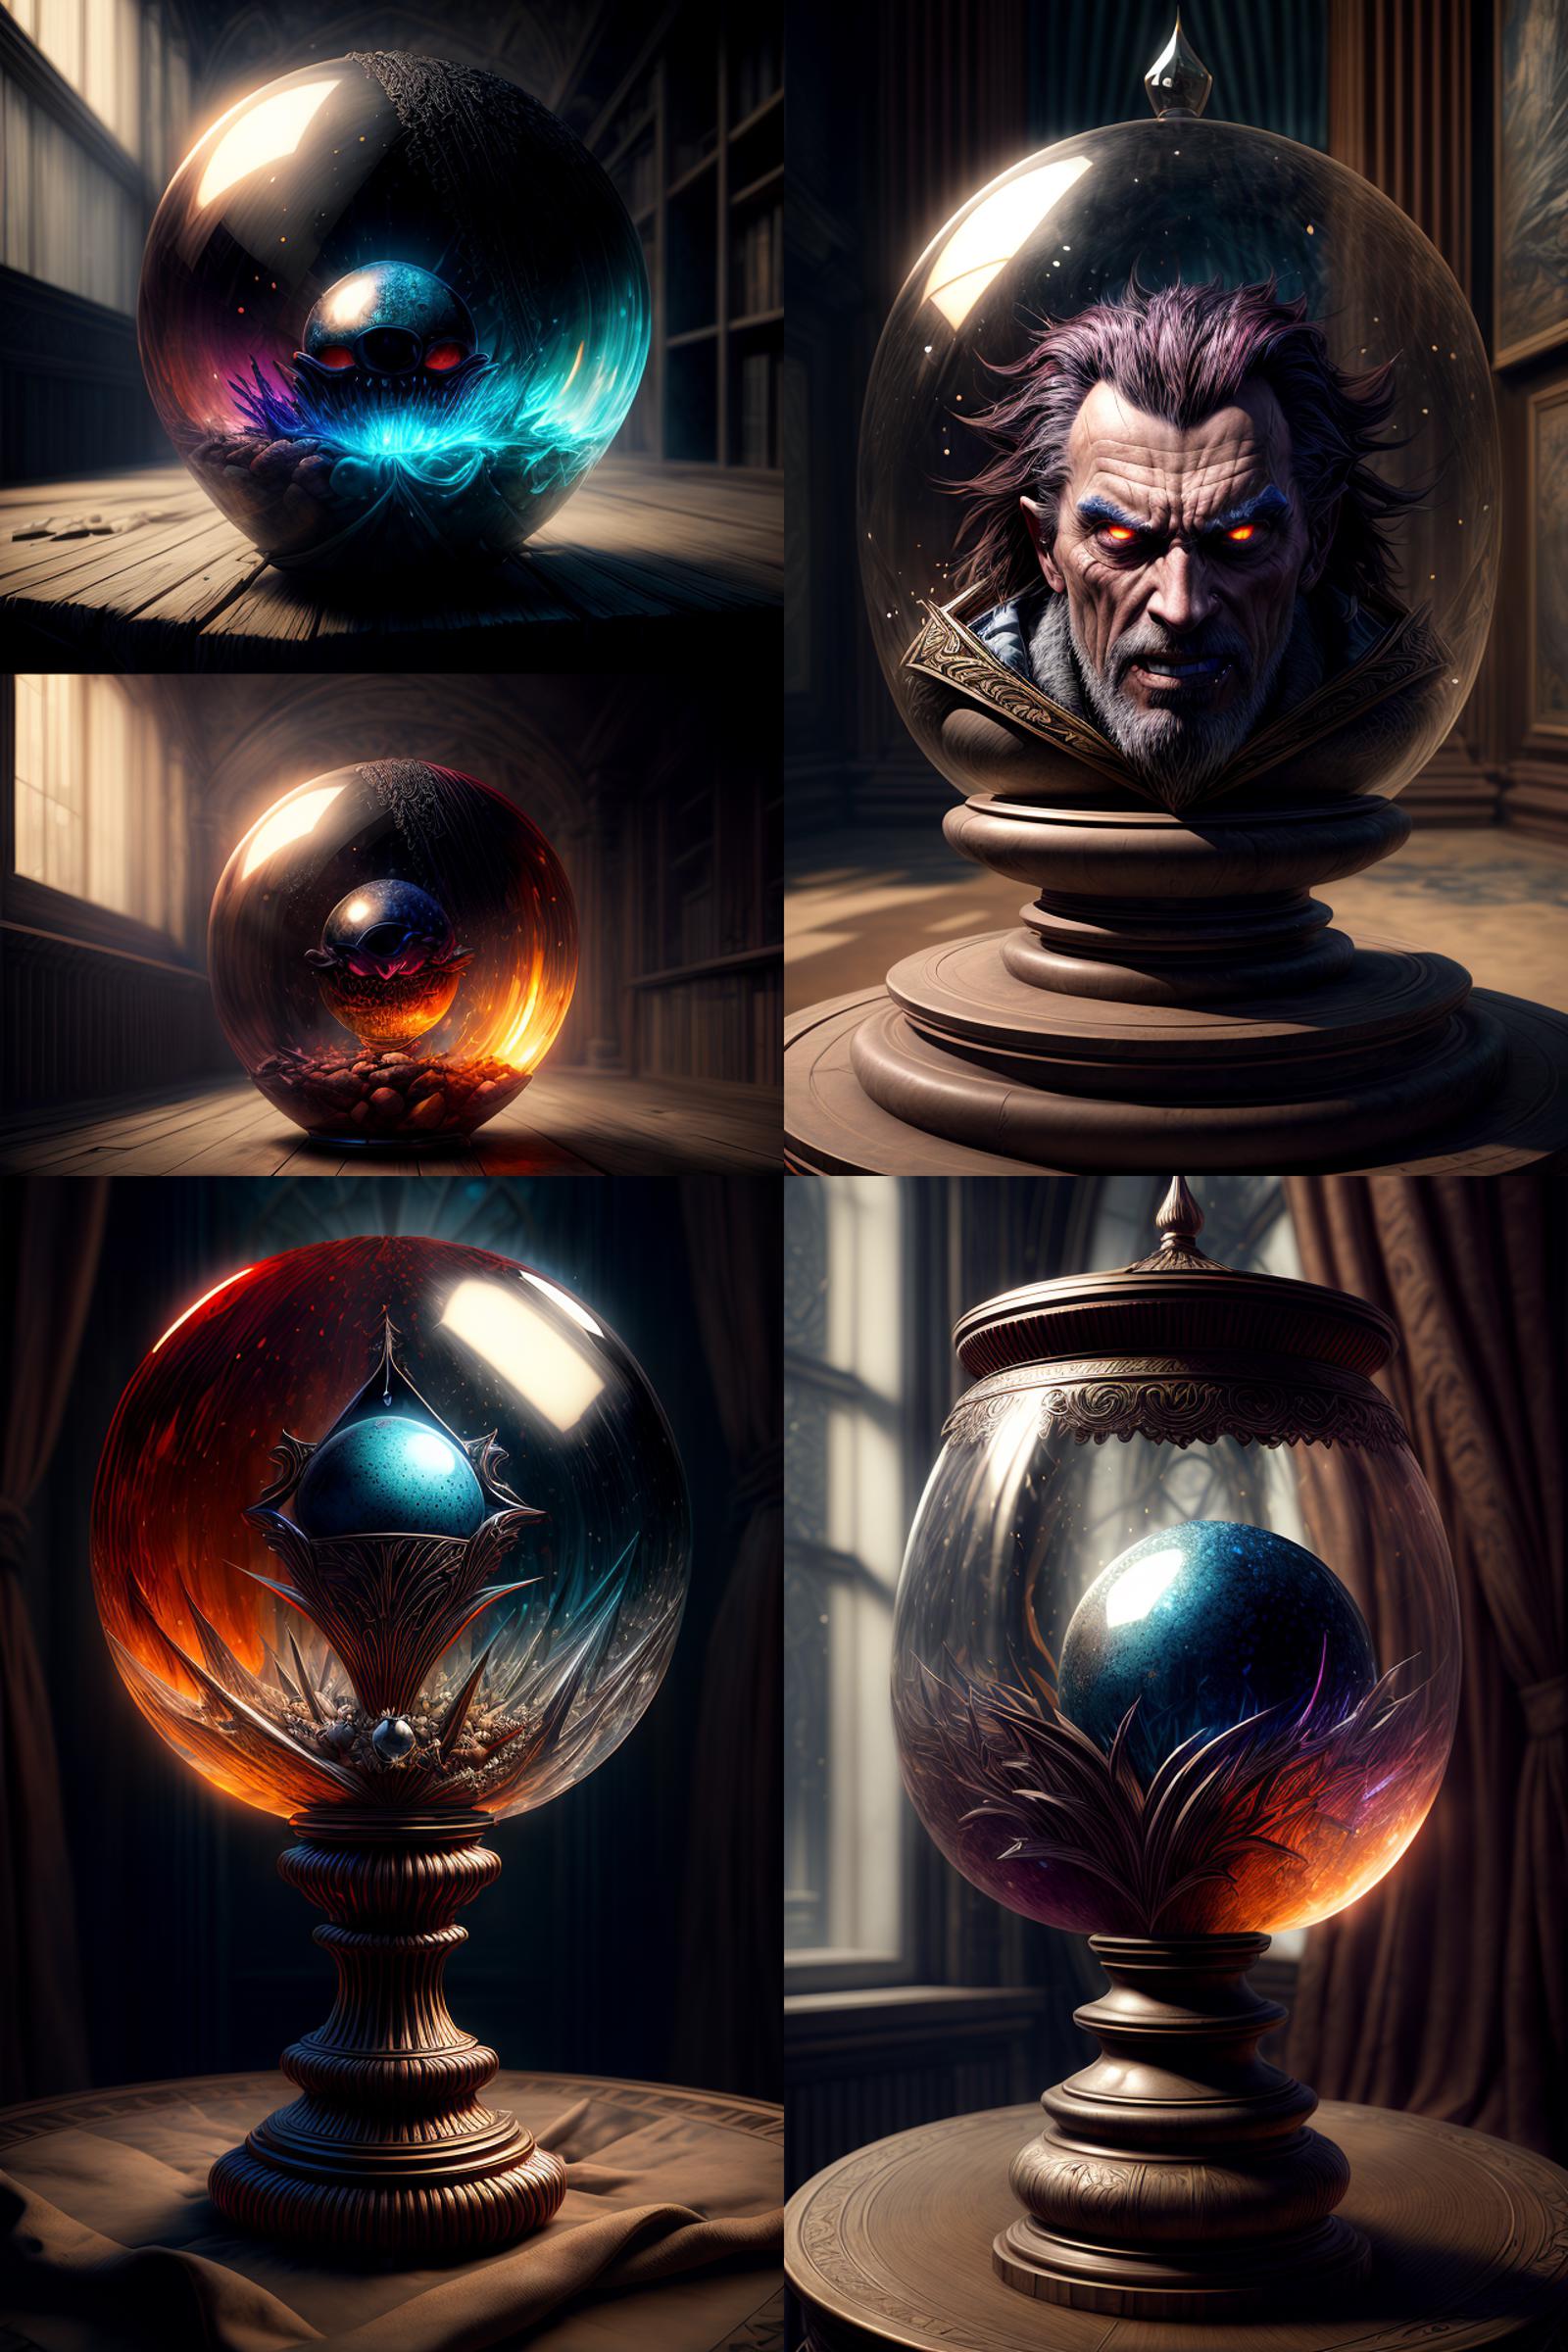 Orbs and Crystal balls, and more Orbs - fC 球体 image by JoeLink